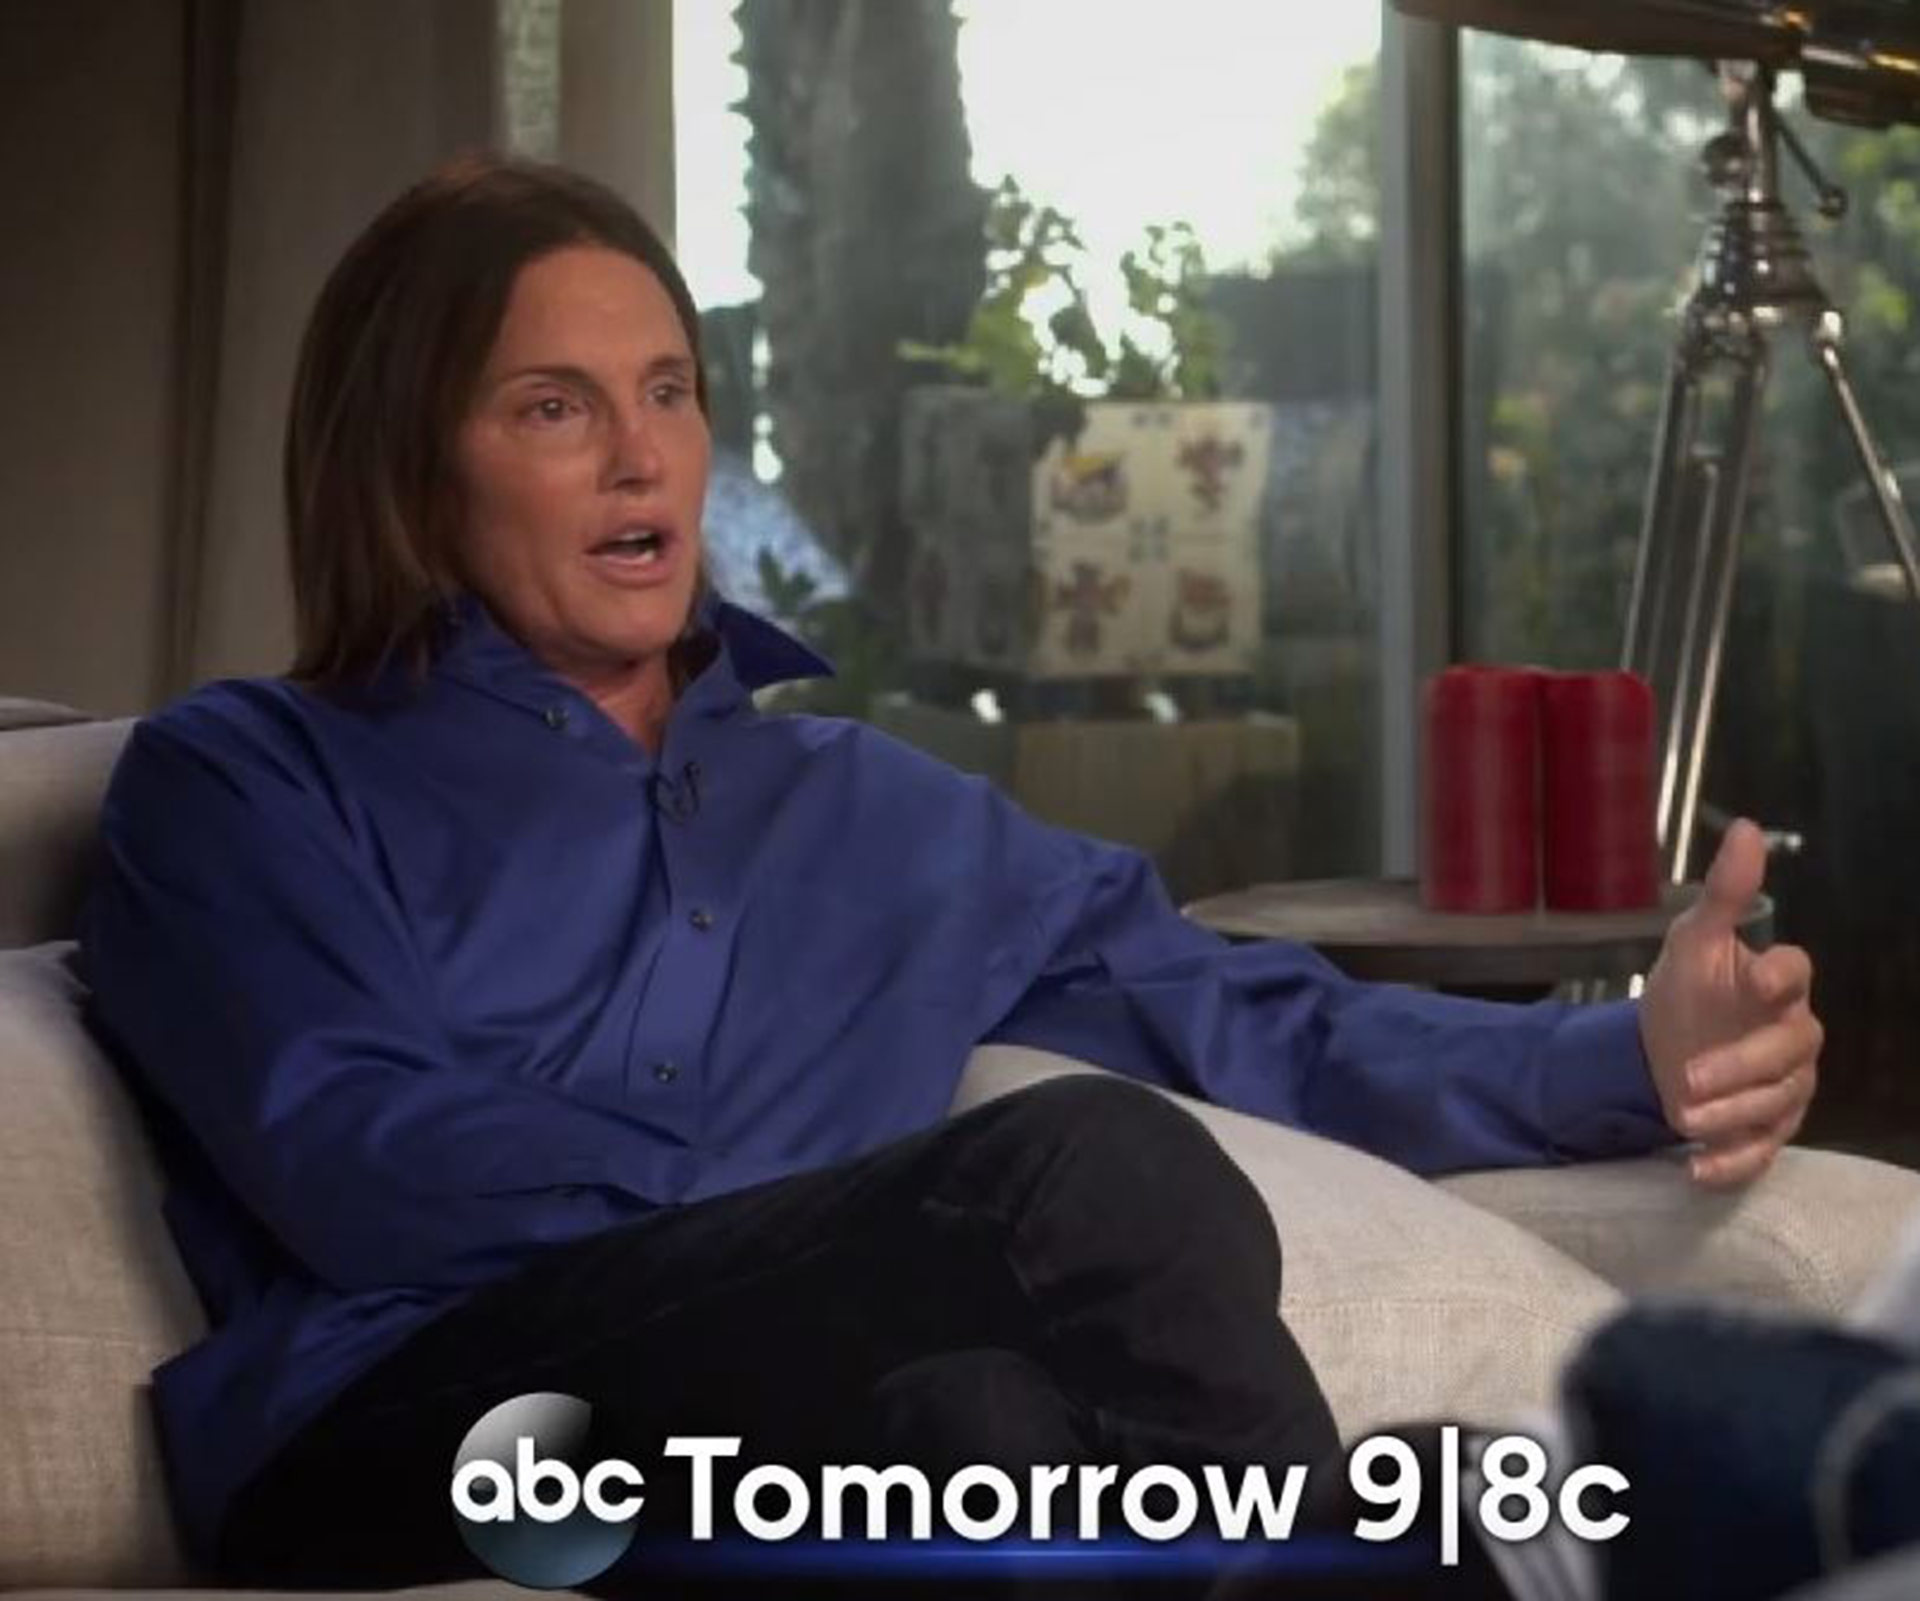 Bruce Jenner reveals gender transition in tell-all Diane Sawyer interview